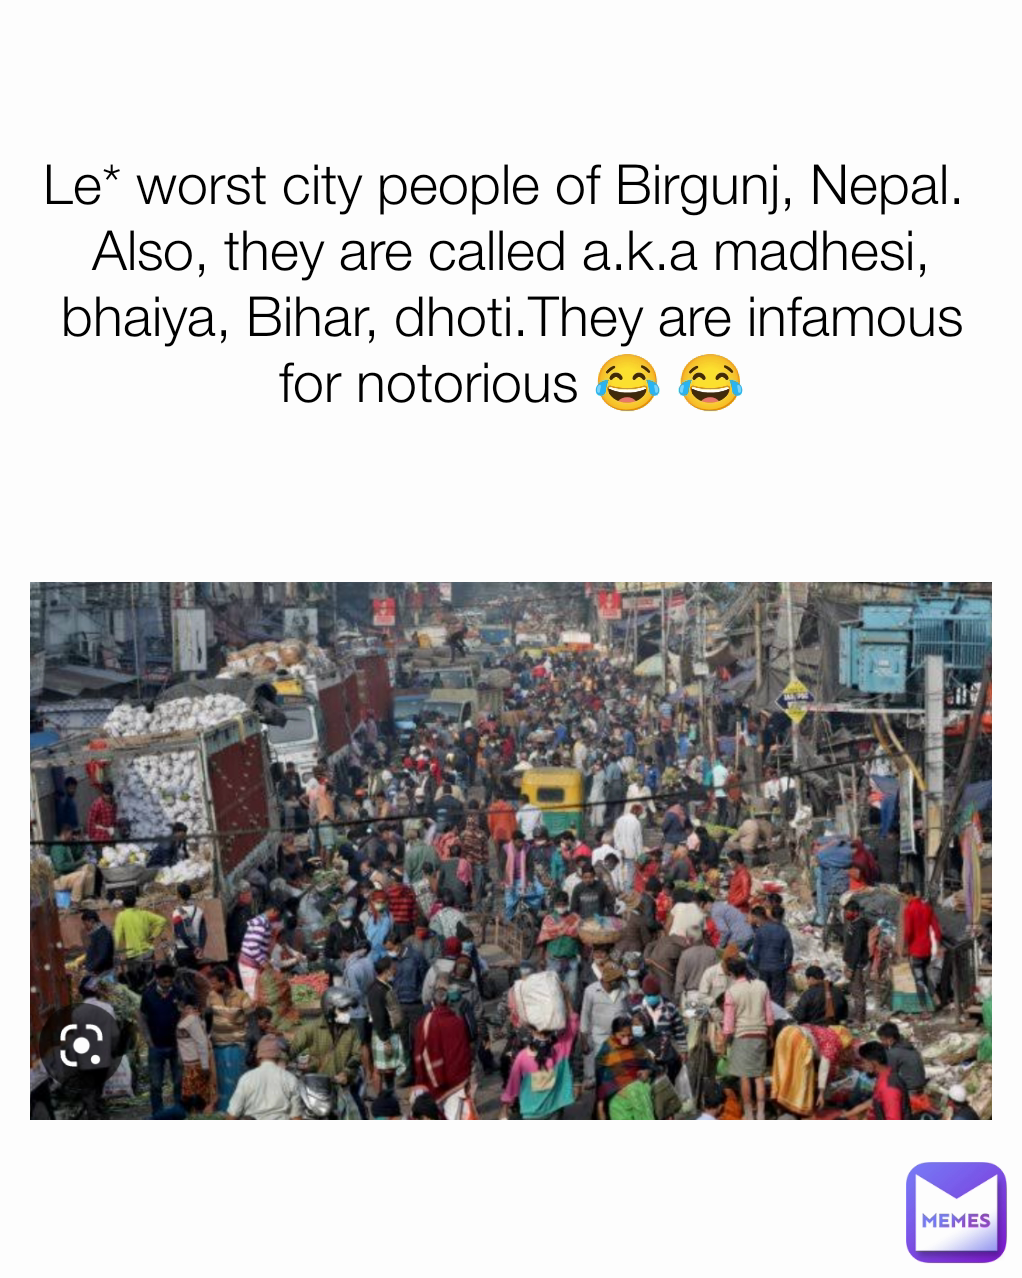 Le* worst city people of Birgunj, Nepal. 
Also, they are called a.k.a madhesi, bhaiya, Bihar, dhoti.They are infamous for notorious 😂 😂